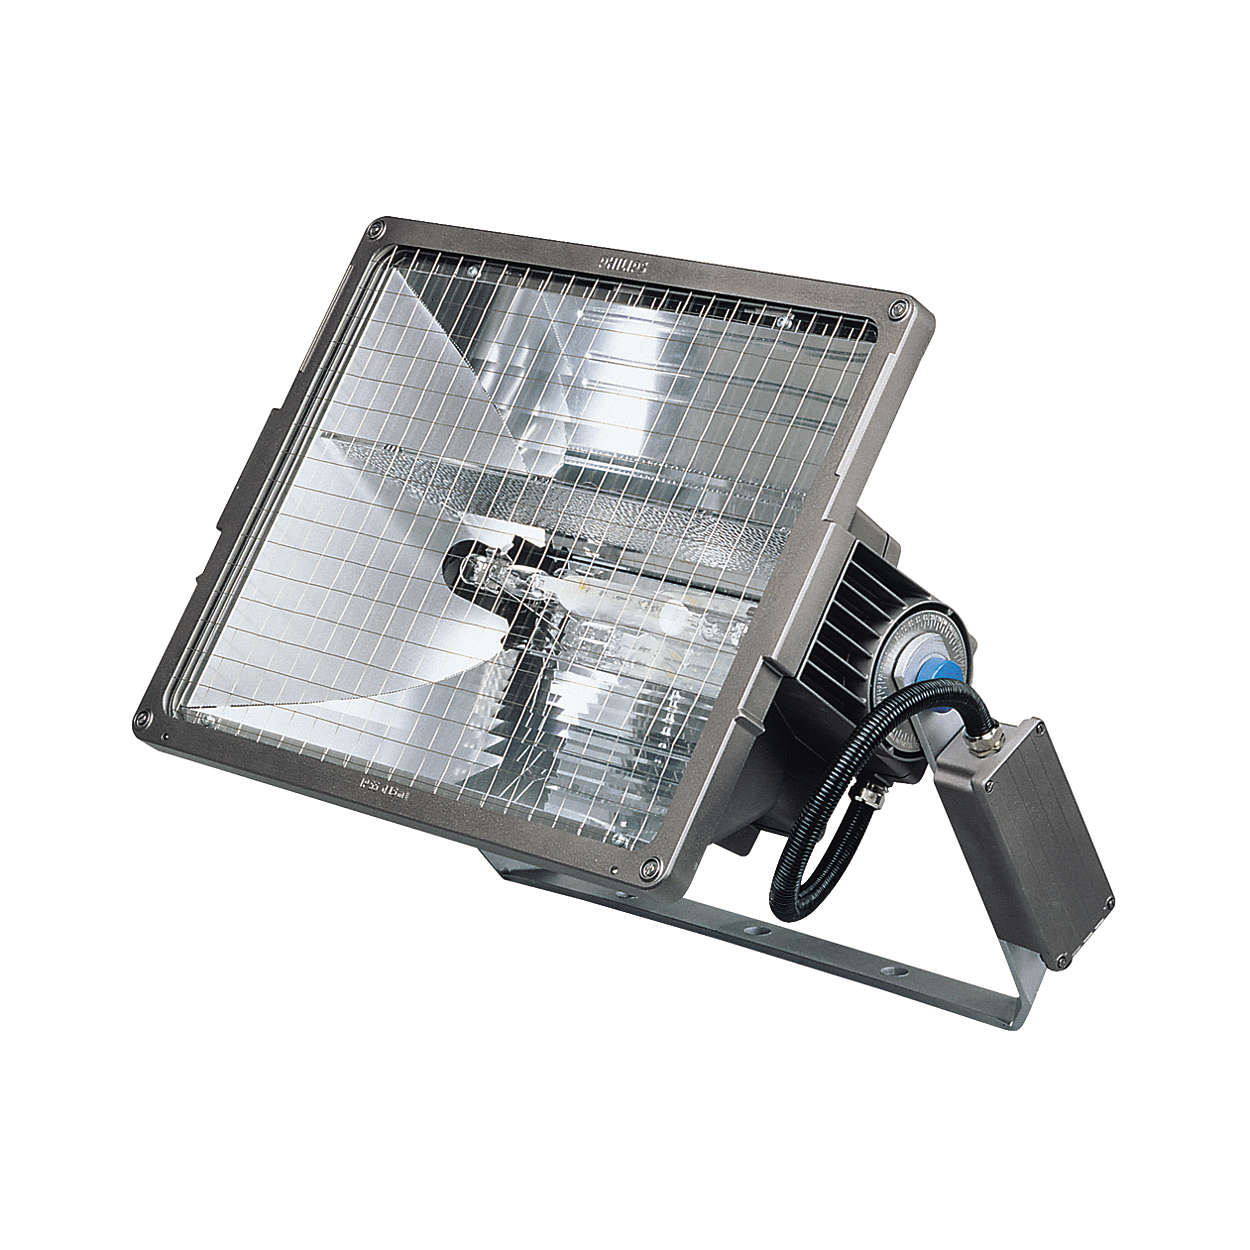 PowerVision – high-performance floodlighting